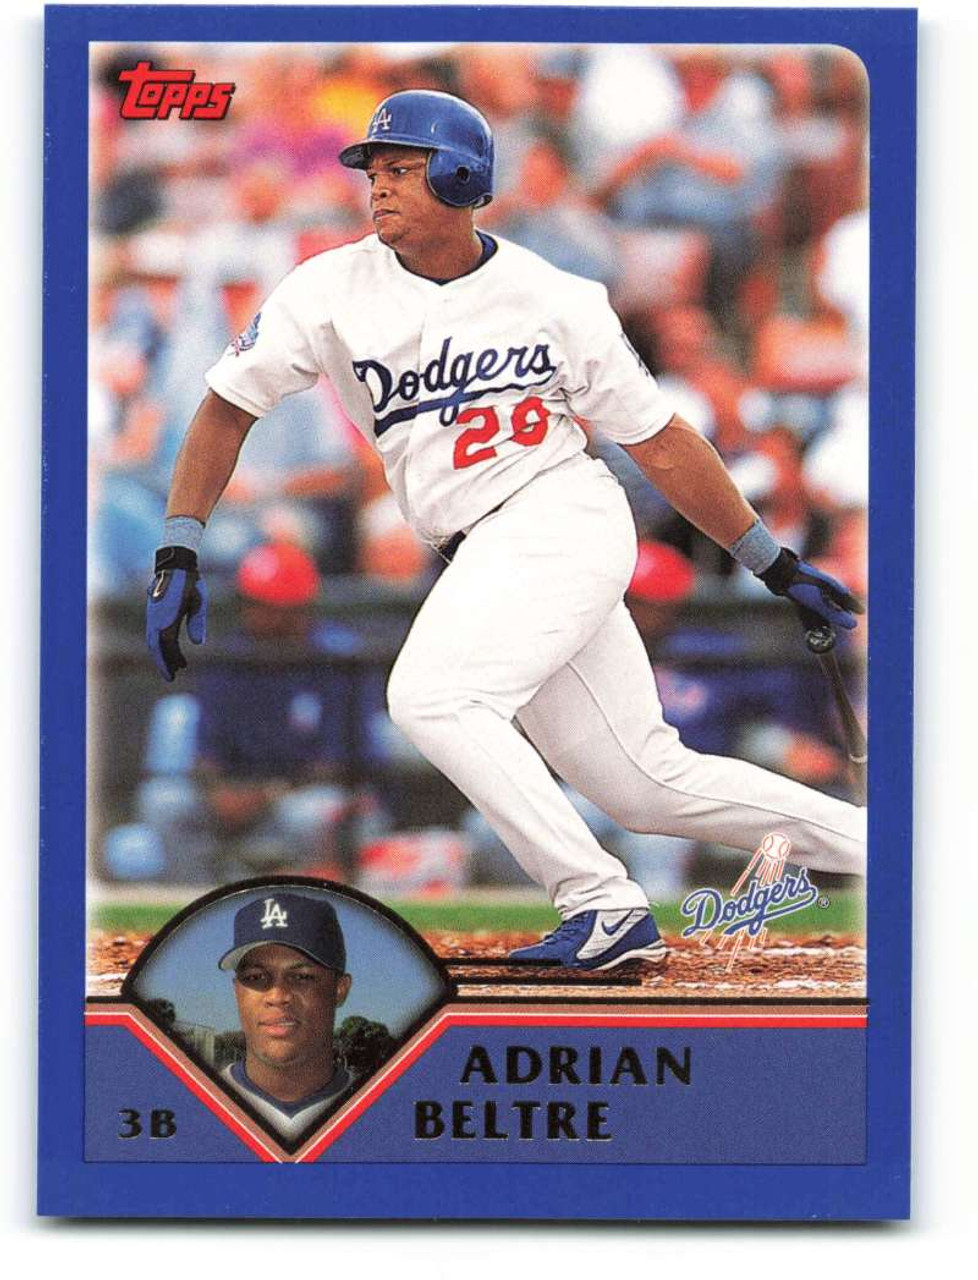 Adrian Beltre Signs Autograph Deal with Topps, Kicks Off with